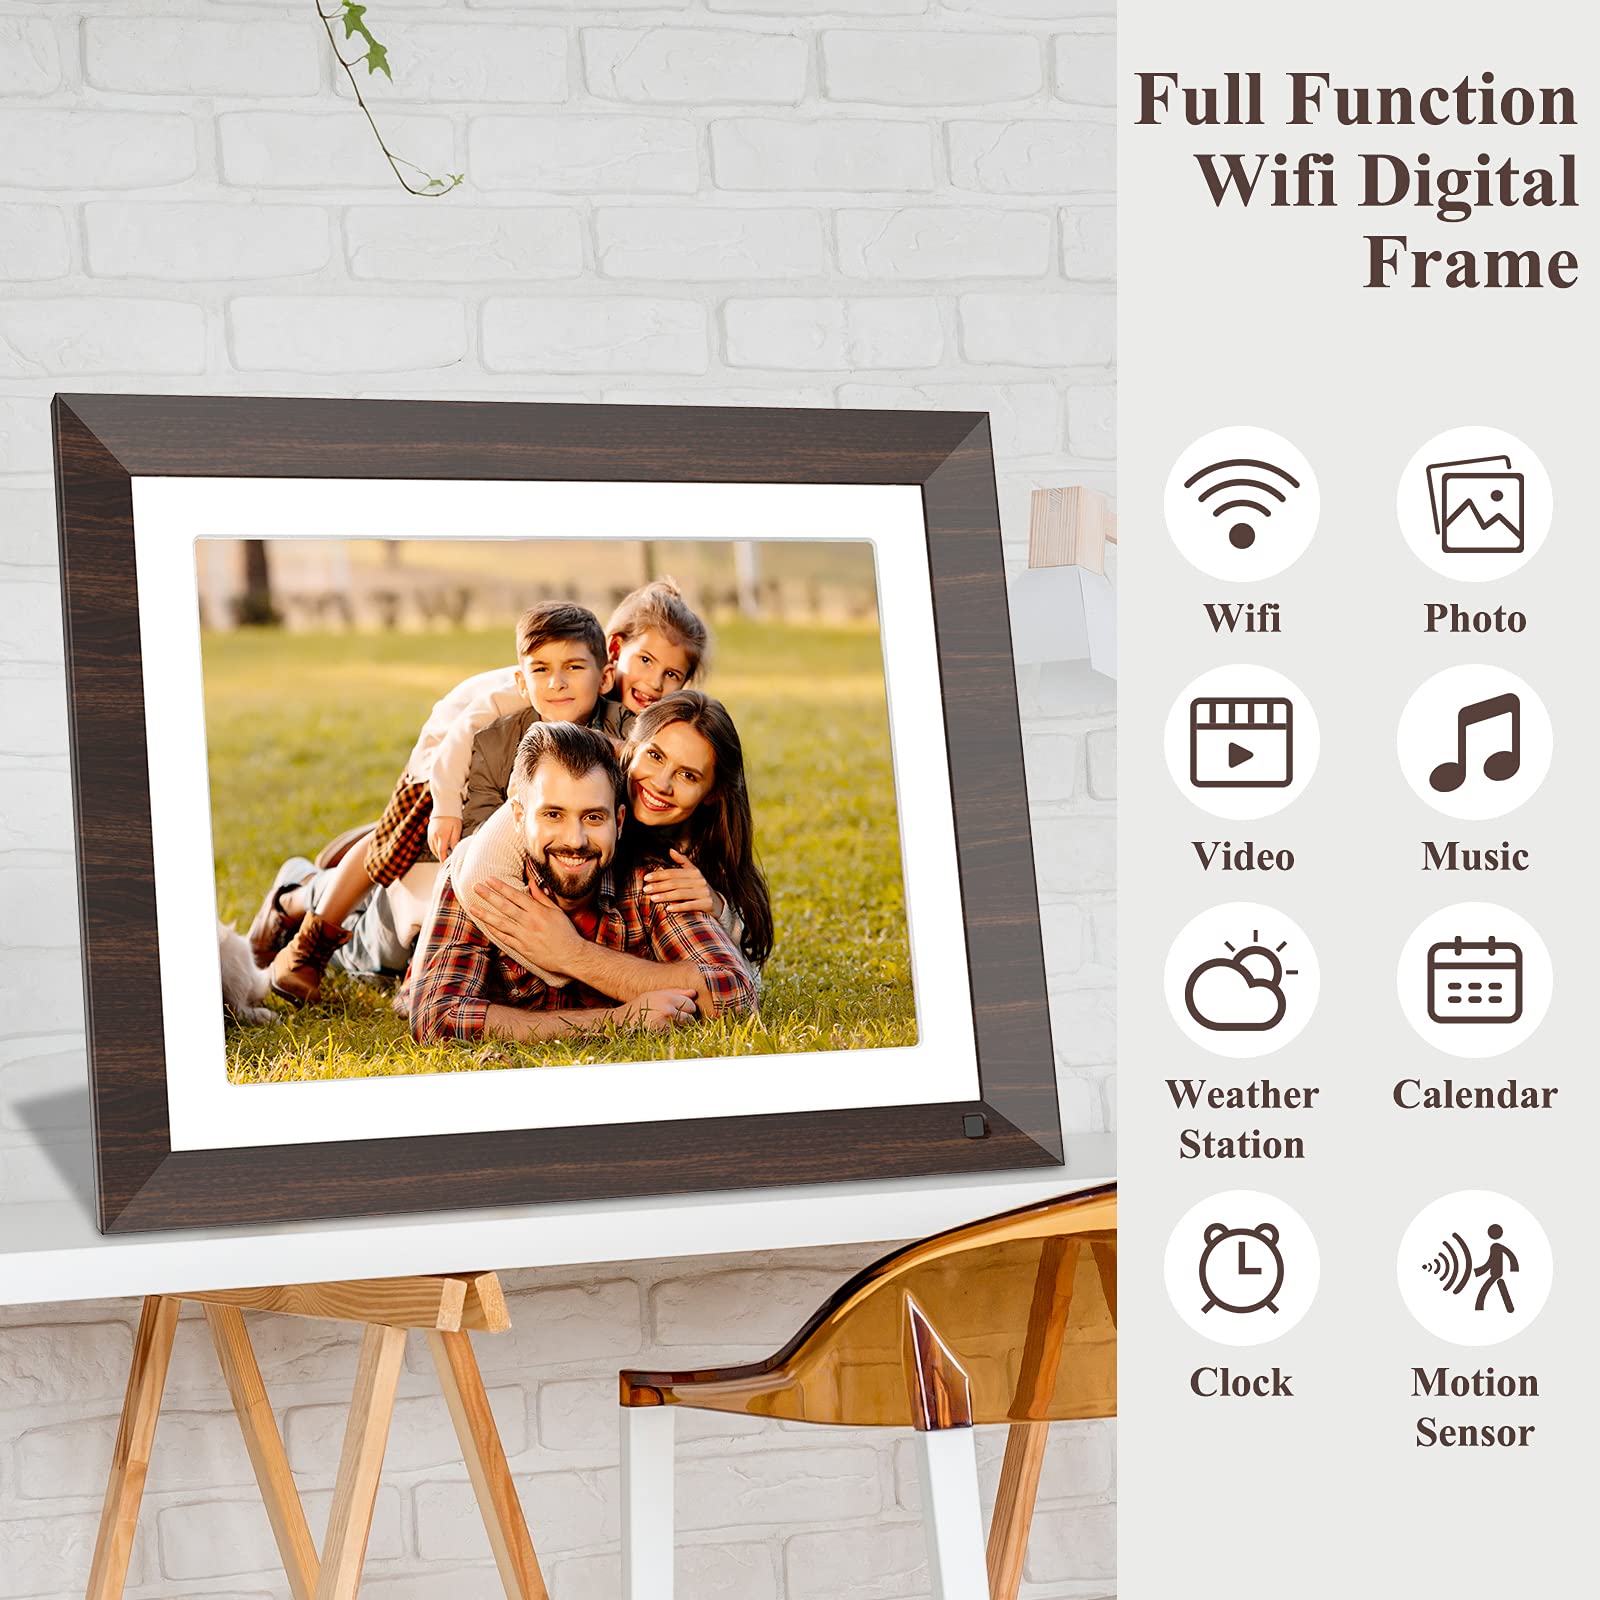 ZTSWKJ Digital Frame 2K -11 inch WiFi Digital Picture Frame, Email Photo from Anywhere, Touch Screen Display, Box Speaker, Motion Sensor, One Minute Setup, Gift for Friends and Family (Wood Effect)